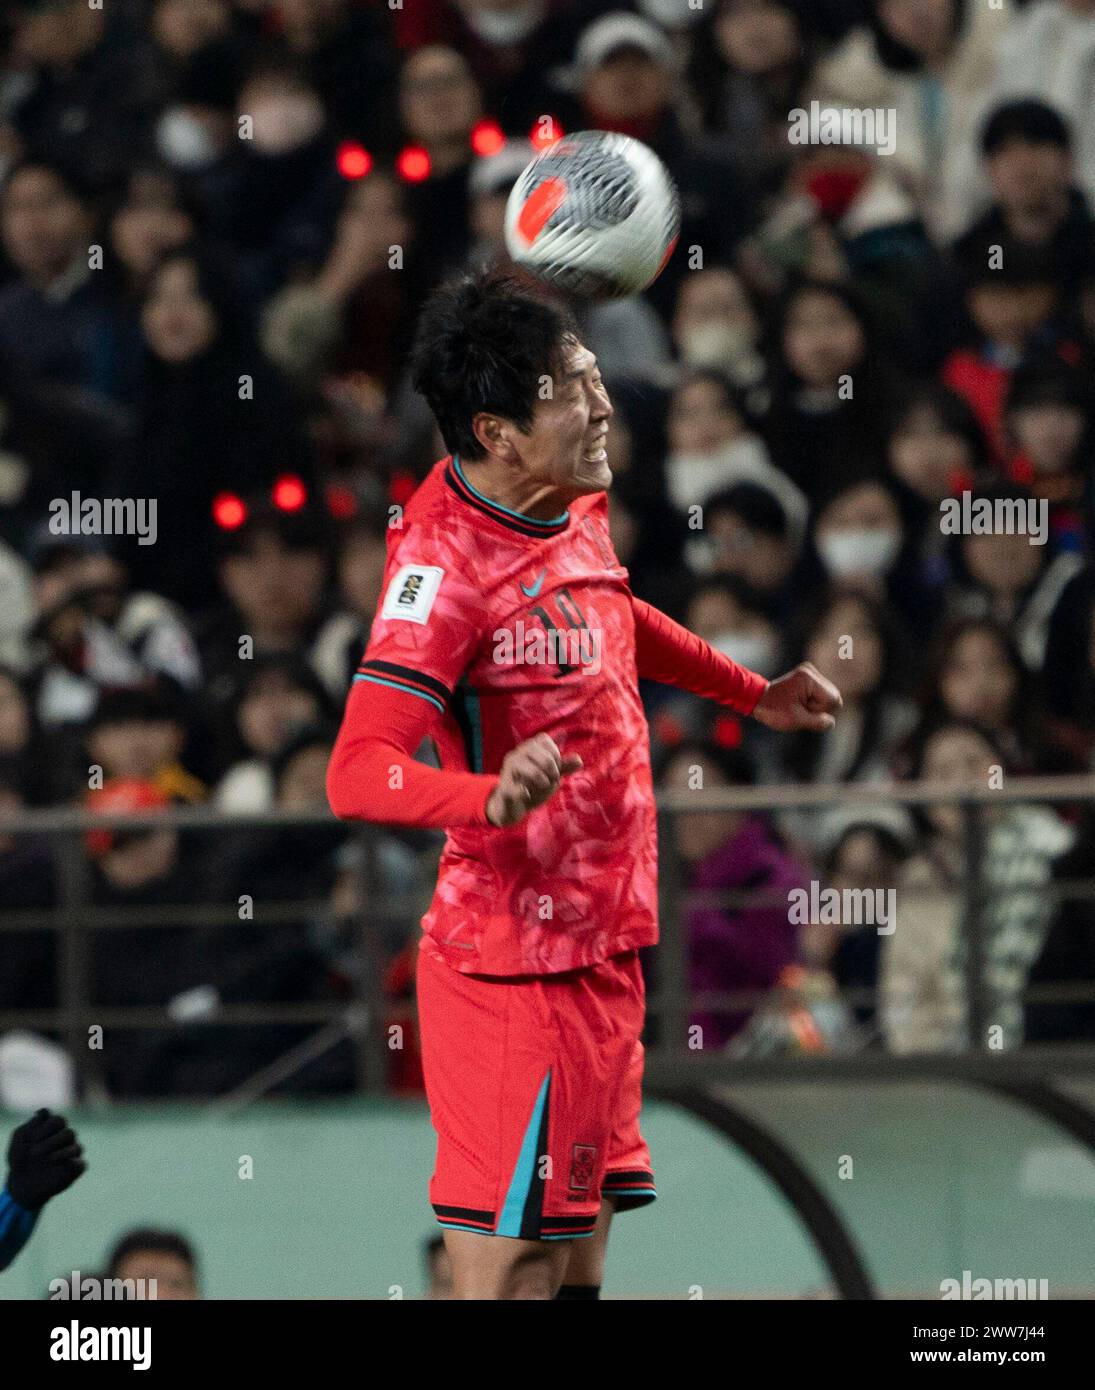 Seoul, South Korea. 21st Mar, 2024. South Korean player Kim Young-gwon, (19), heading for the ball during the FIFA World Cup Asian 2nd Qualifier soccer match between South Korea and Thailand at the Sangam World Cup Stadium in Seoul, South Korea on March 21, 2024. Score South Korea-Thailand 1-1. (Photo by Lee Young-ho/Sipa USA) Credit: Sipa USA/Alamy Live News Stock Photo